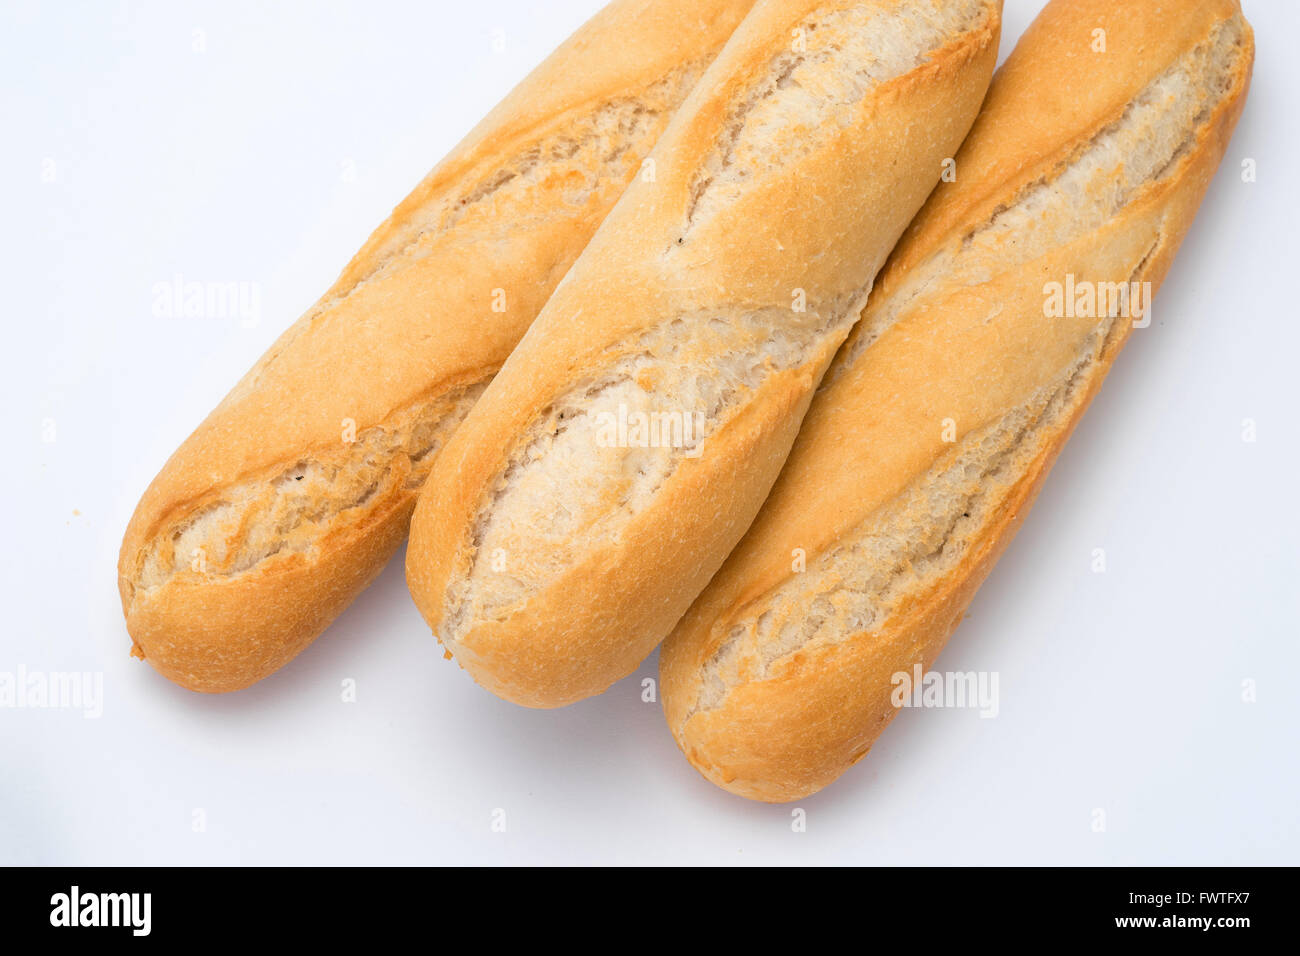 Crusty bread rolls or buns on a white background Stock Photo